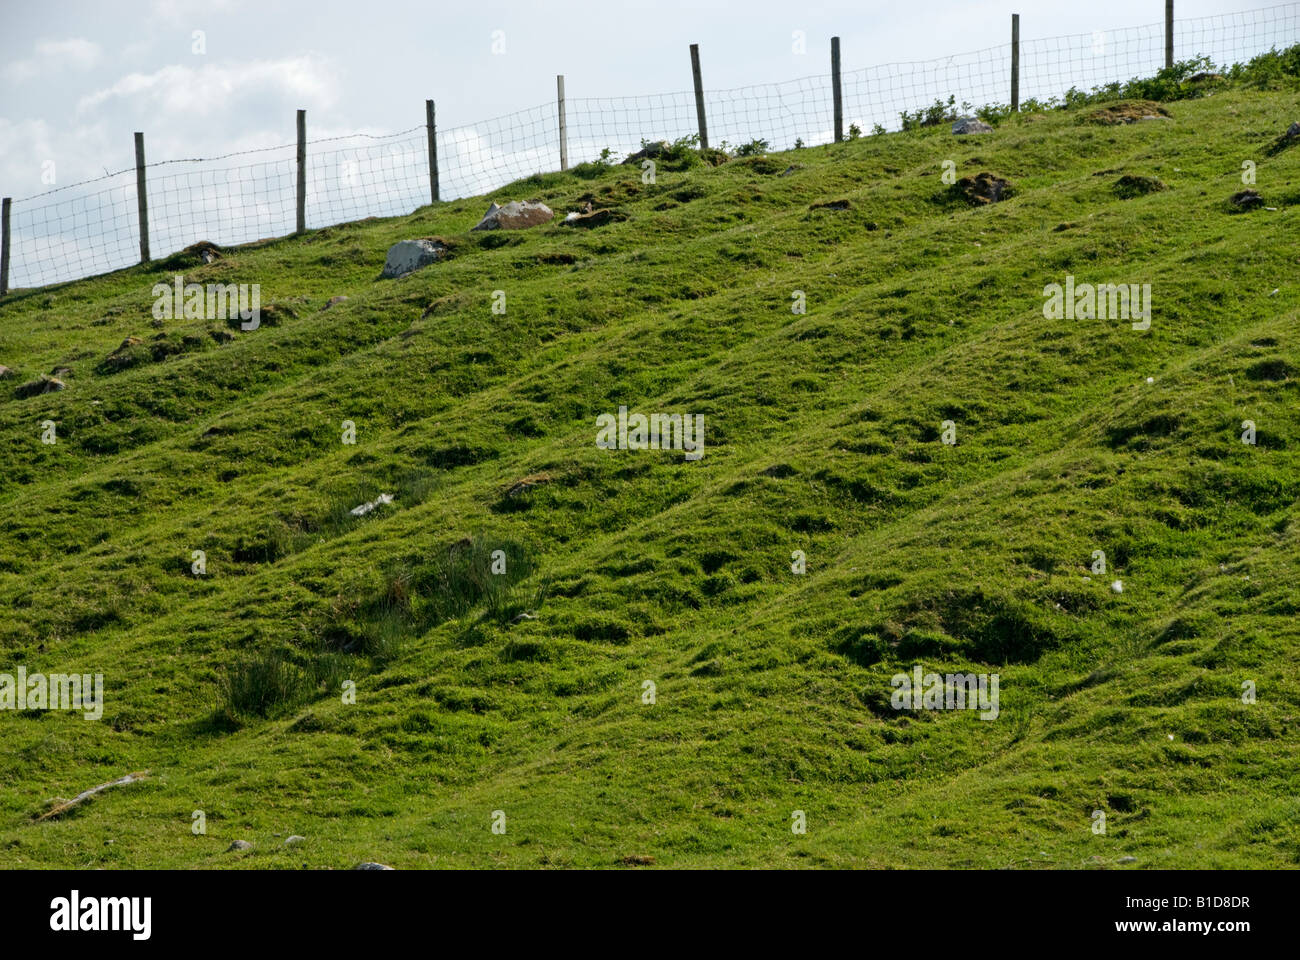 Lazybeds -  traditional form of potato cultivation.  Mulranney County Mayo, Ireland Stock Photo